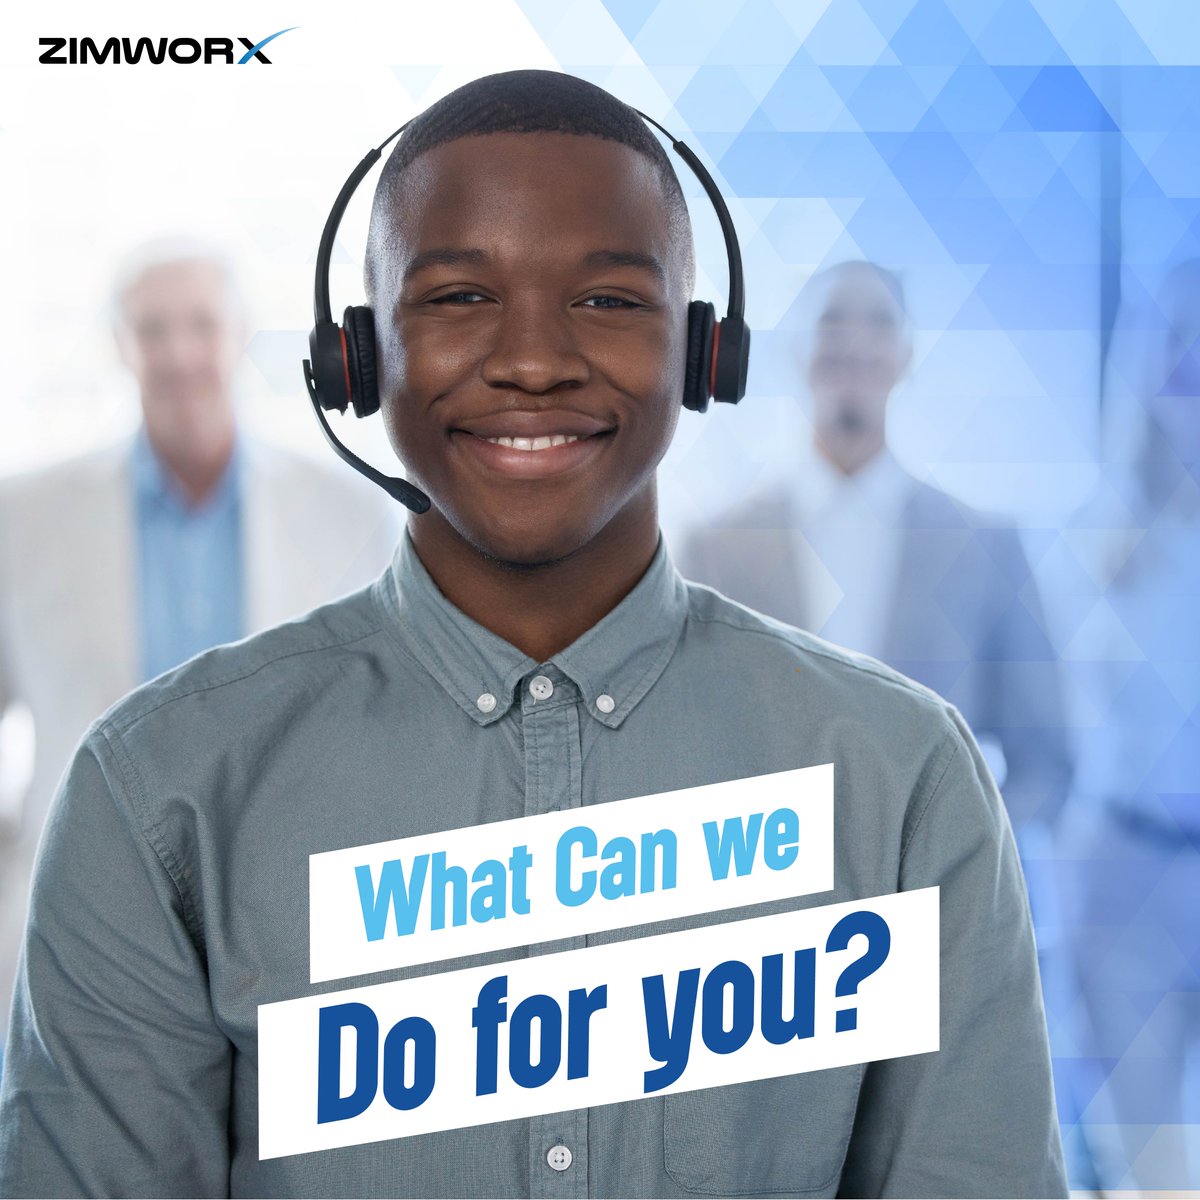 Ready to grow your business? Our highly trained team is here for you! Your dedicated virtual team member can handle: ✅ Marketing & Sales Support ✅ Executive Assistance ✅ IT support & more Schedule a discovery call at ZimWorX.com/time #virtualassistants #remoteteams